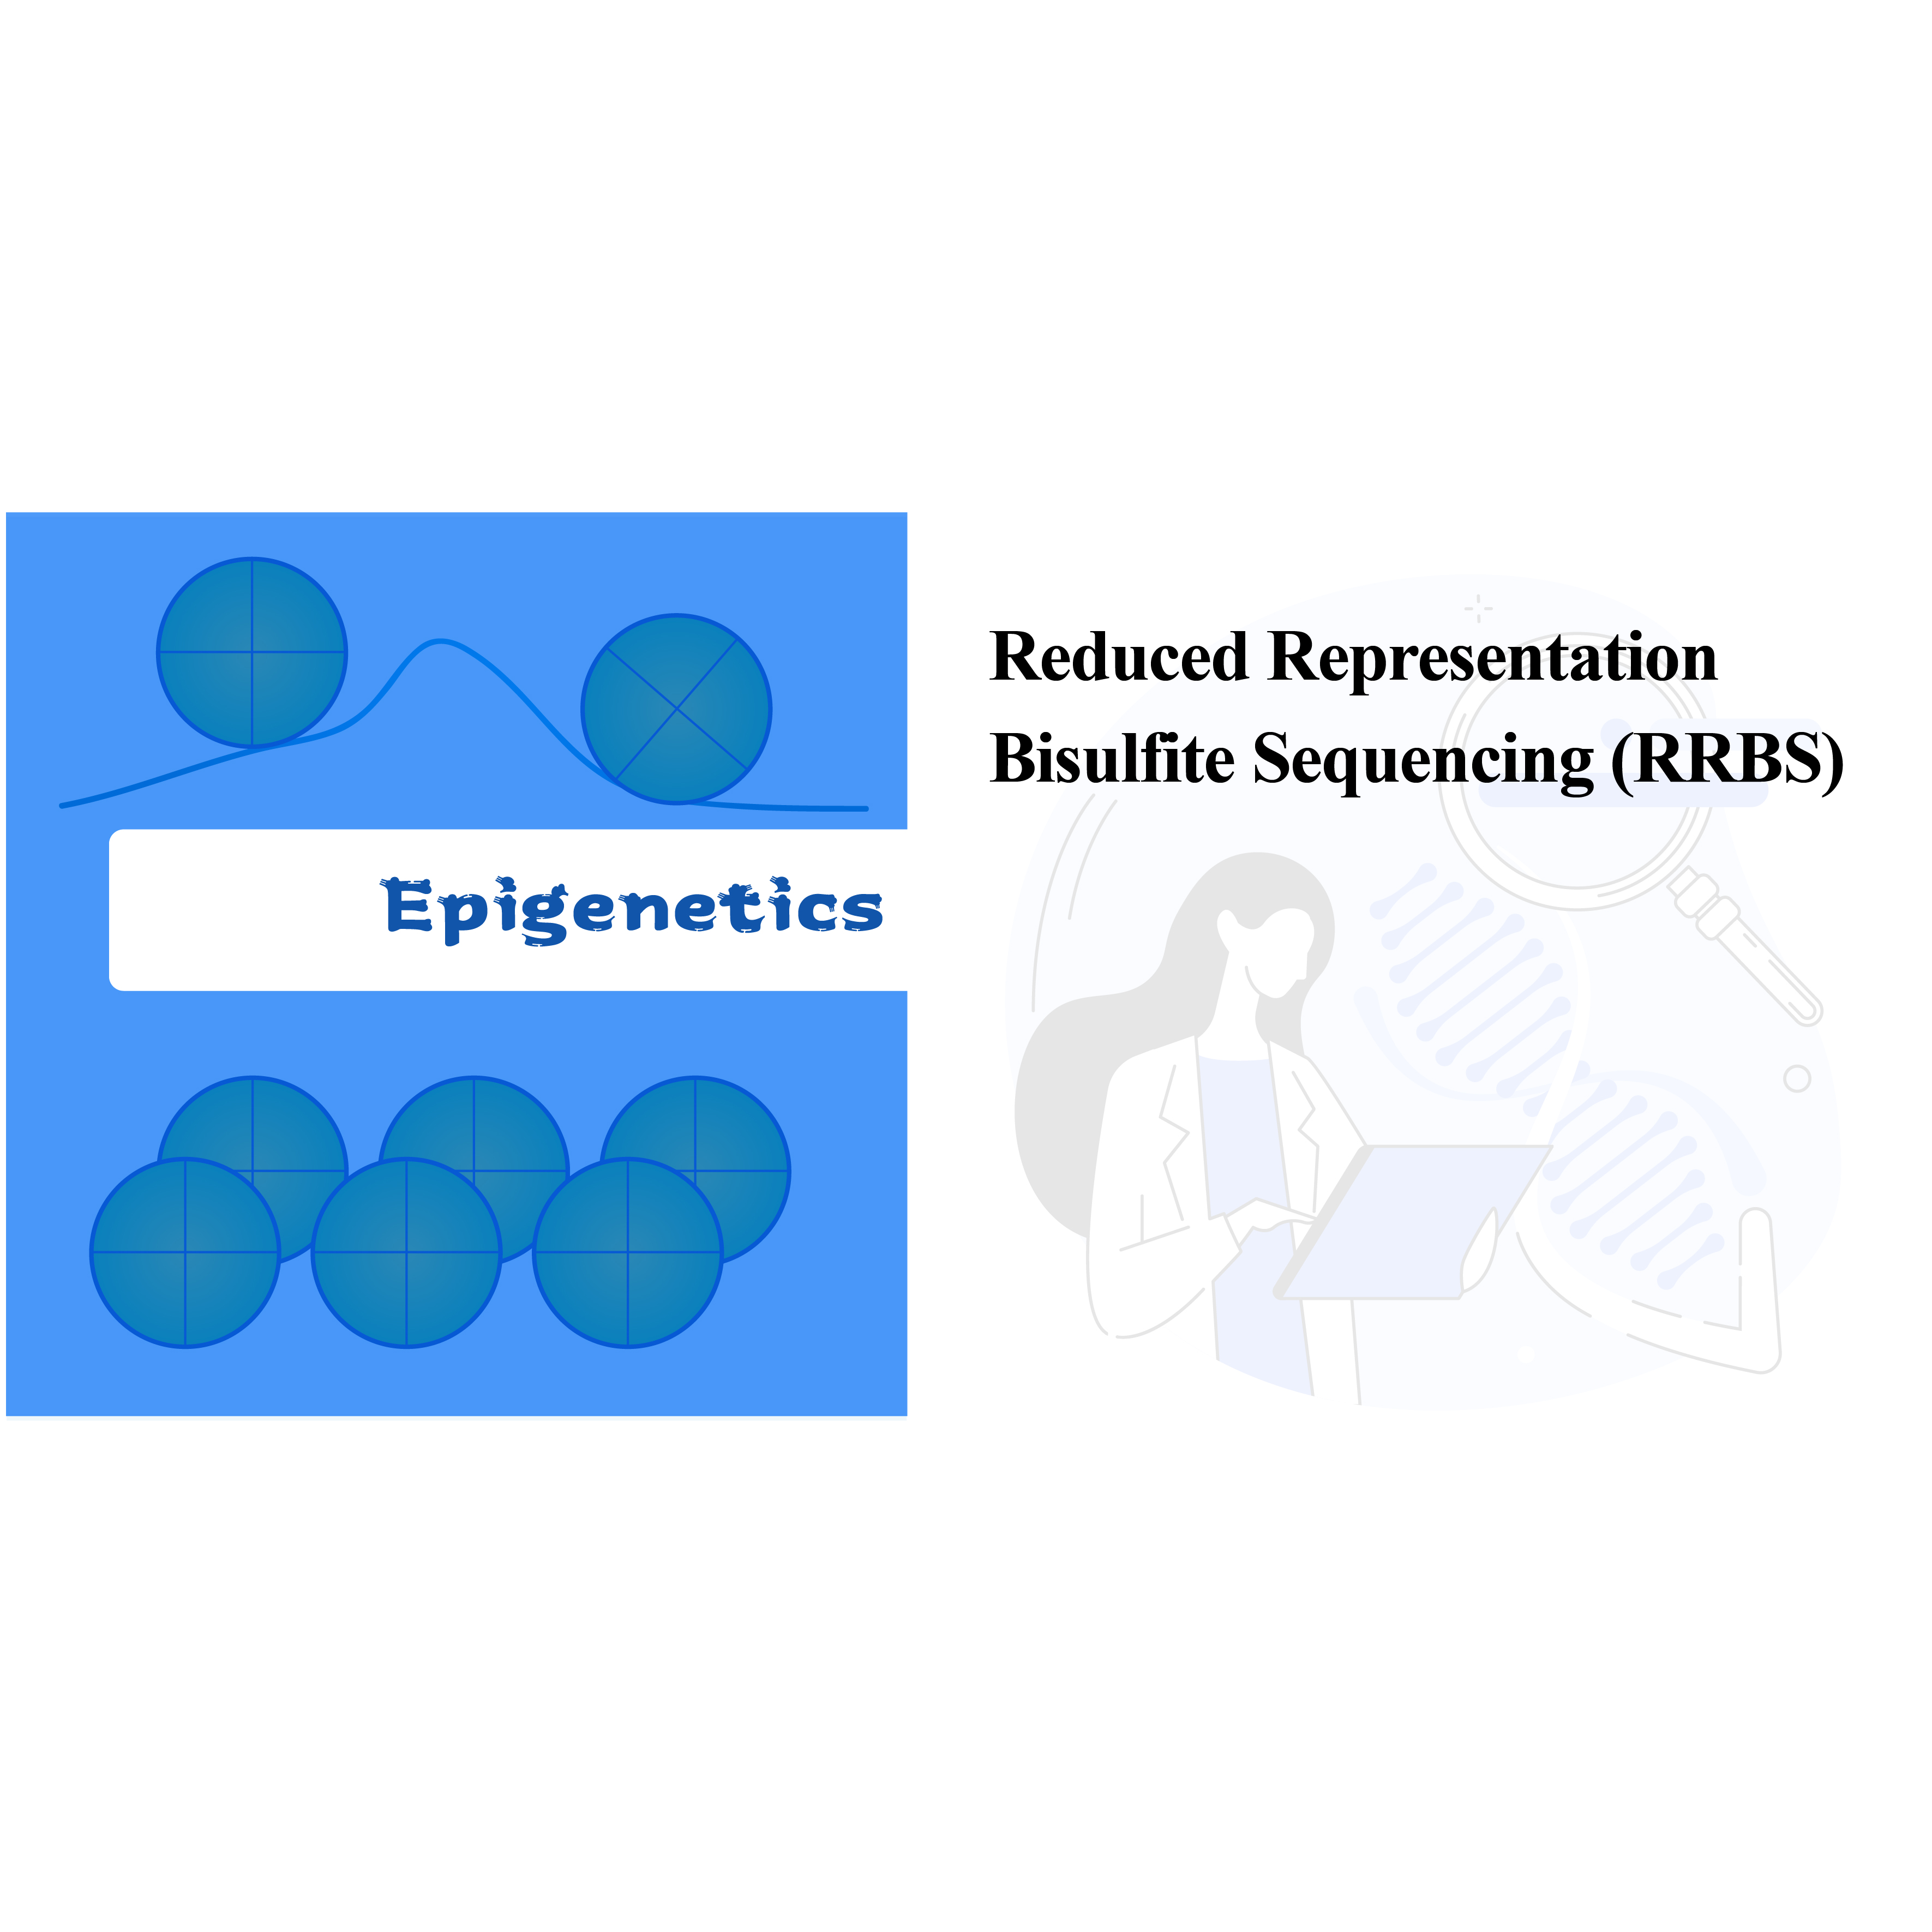 Reduced Representation Bisulfite Sequencing (RRBS)